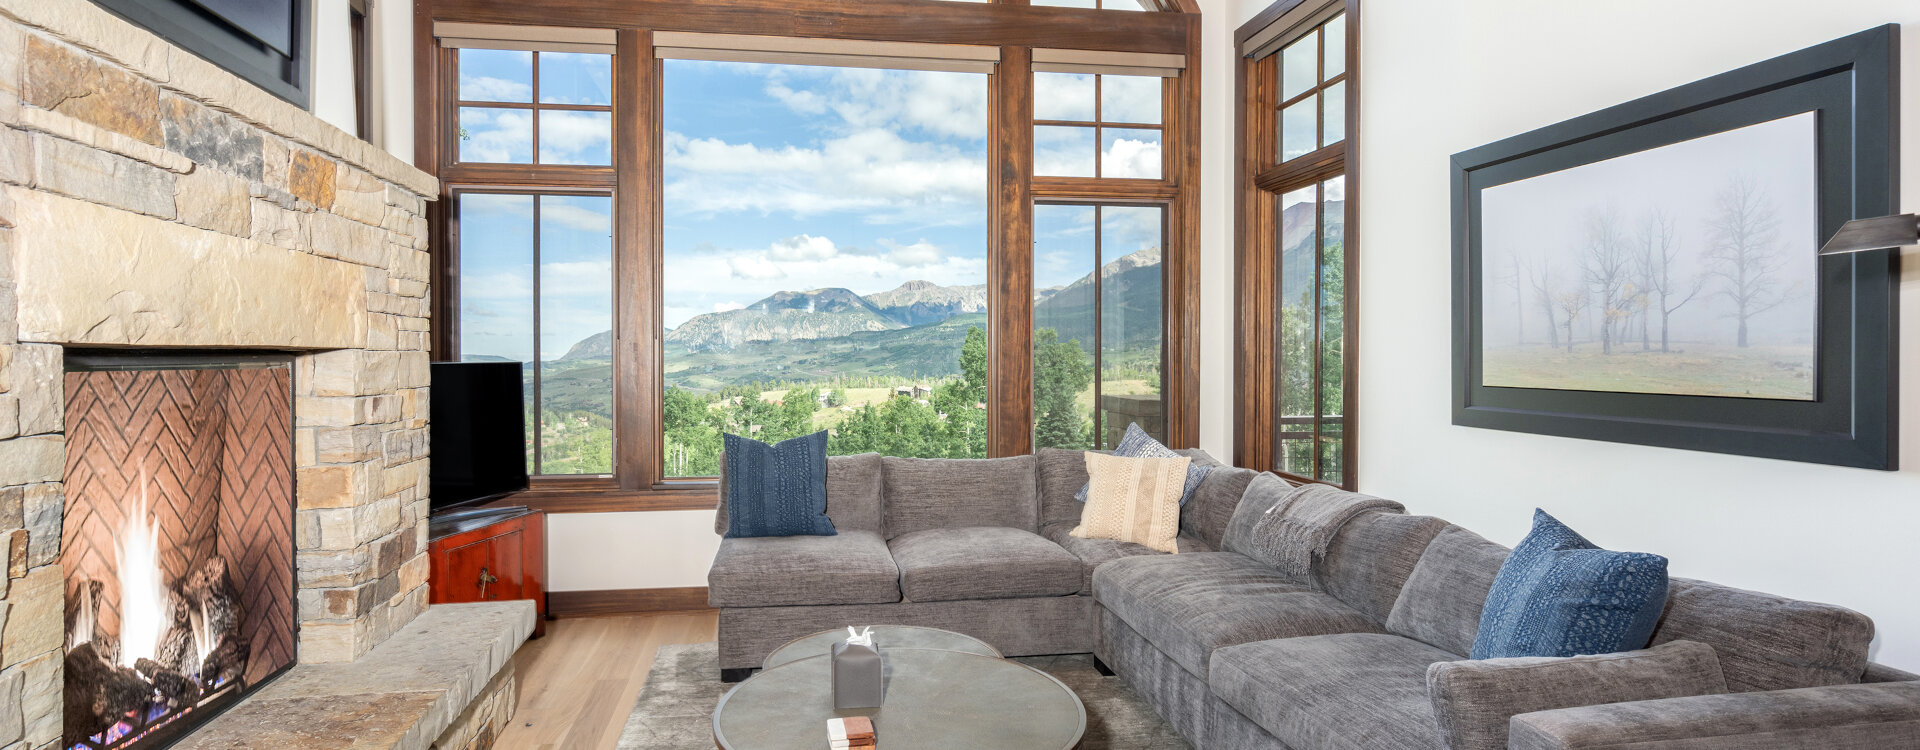 1-telluride-aspens-at-courcheval-living-room